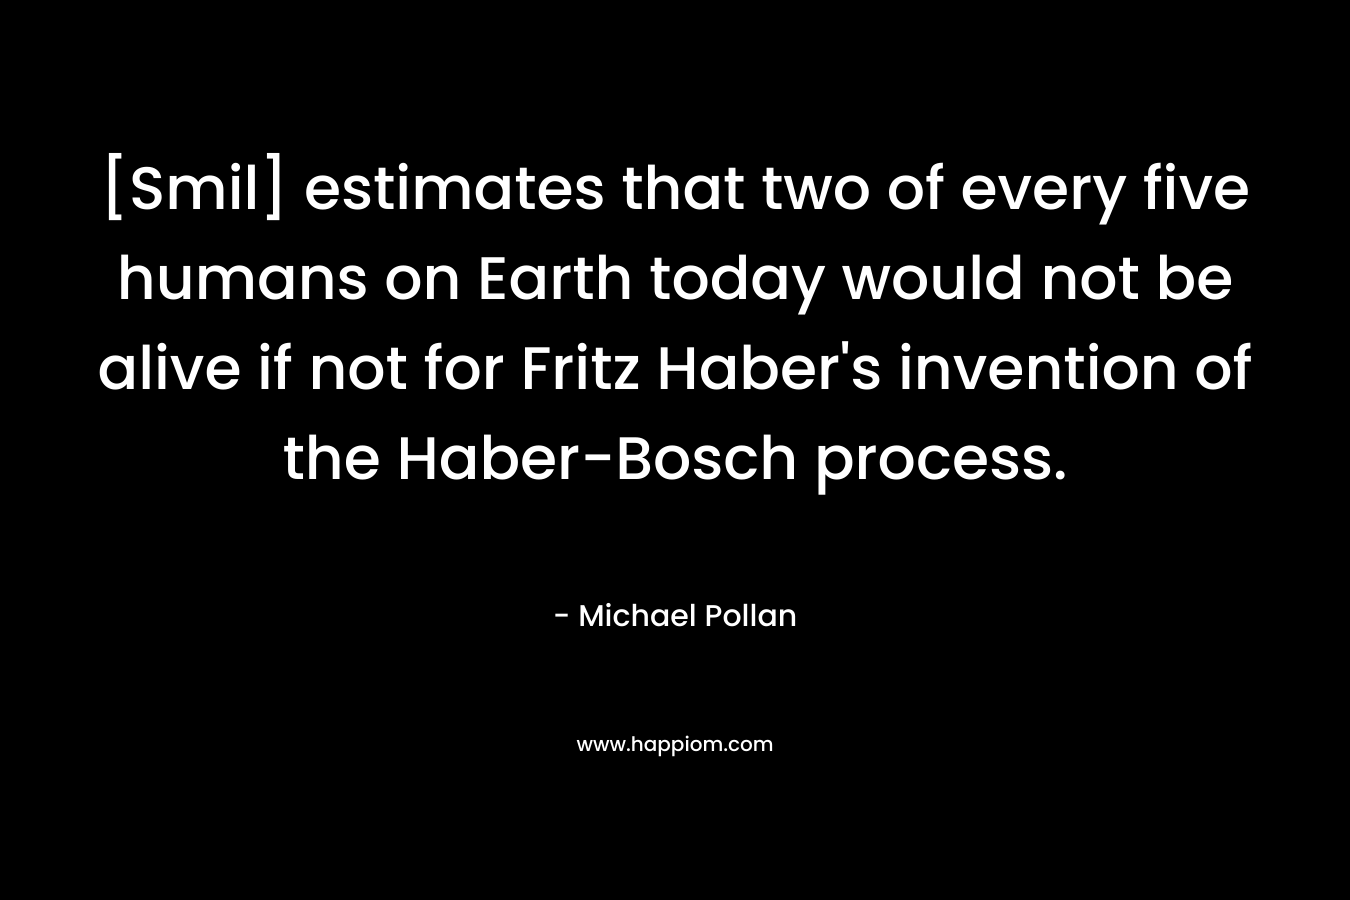 [Smil] estimates that two of every five humans on Earth today would not be alive if not for Fritz Haber’s invention of the Haber-Bosch process. – Michael Pollan